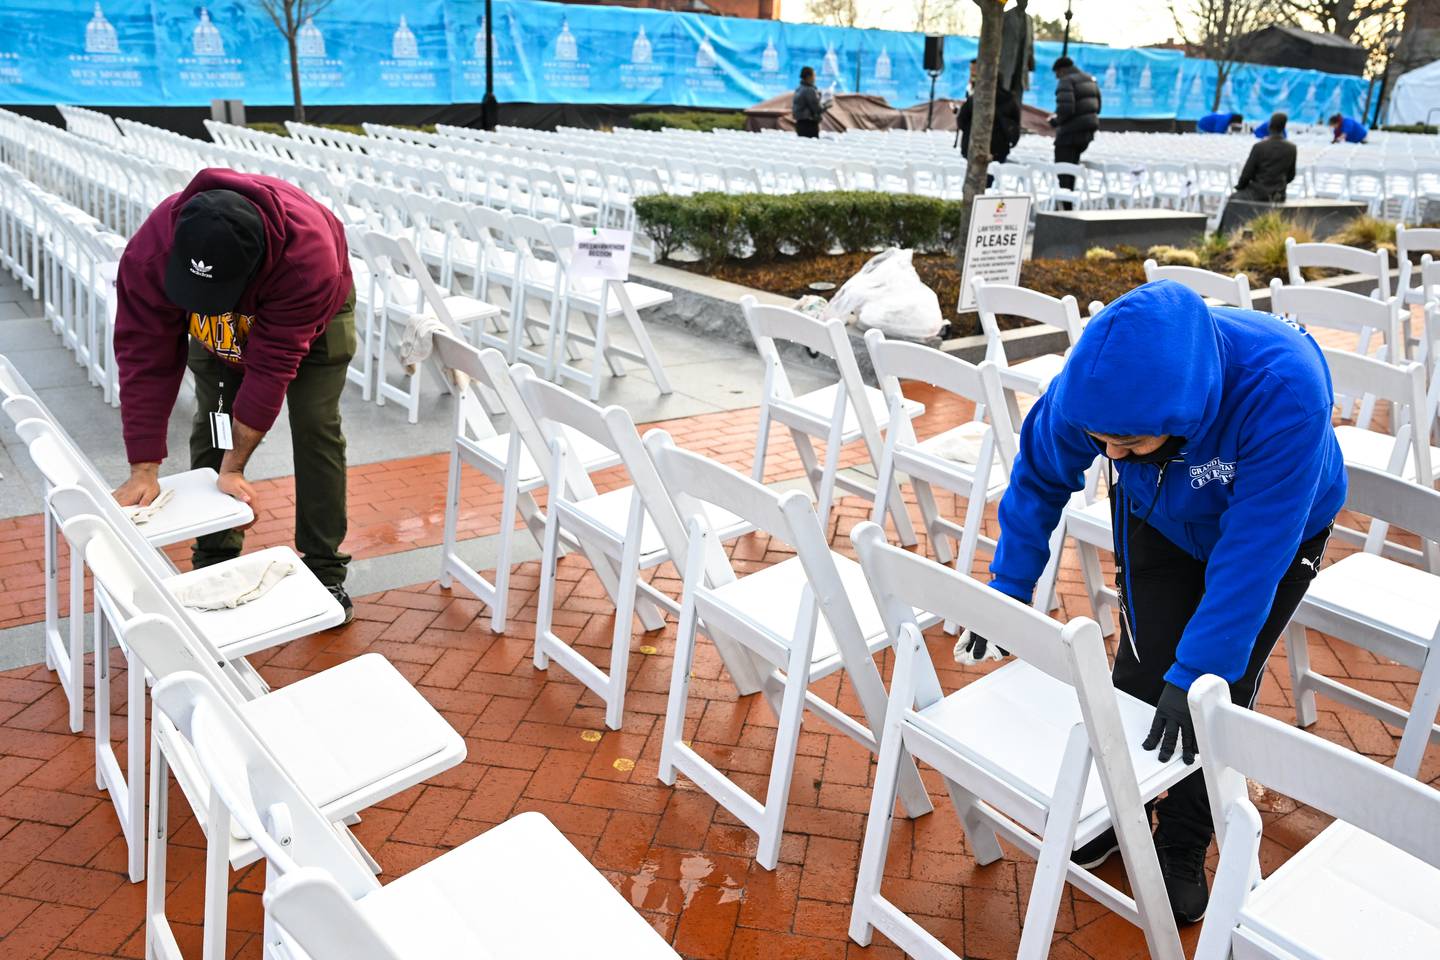 Workers clean water from chairs before the swearing in ceremony of Wes Moore, Wednesday, Jan. 18, 2023, in Annapolis.